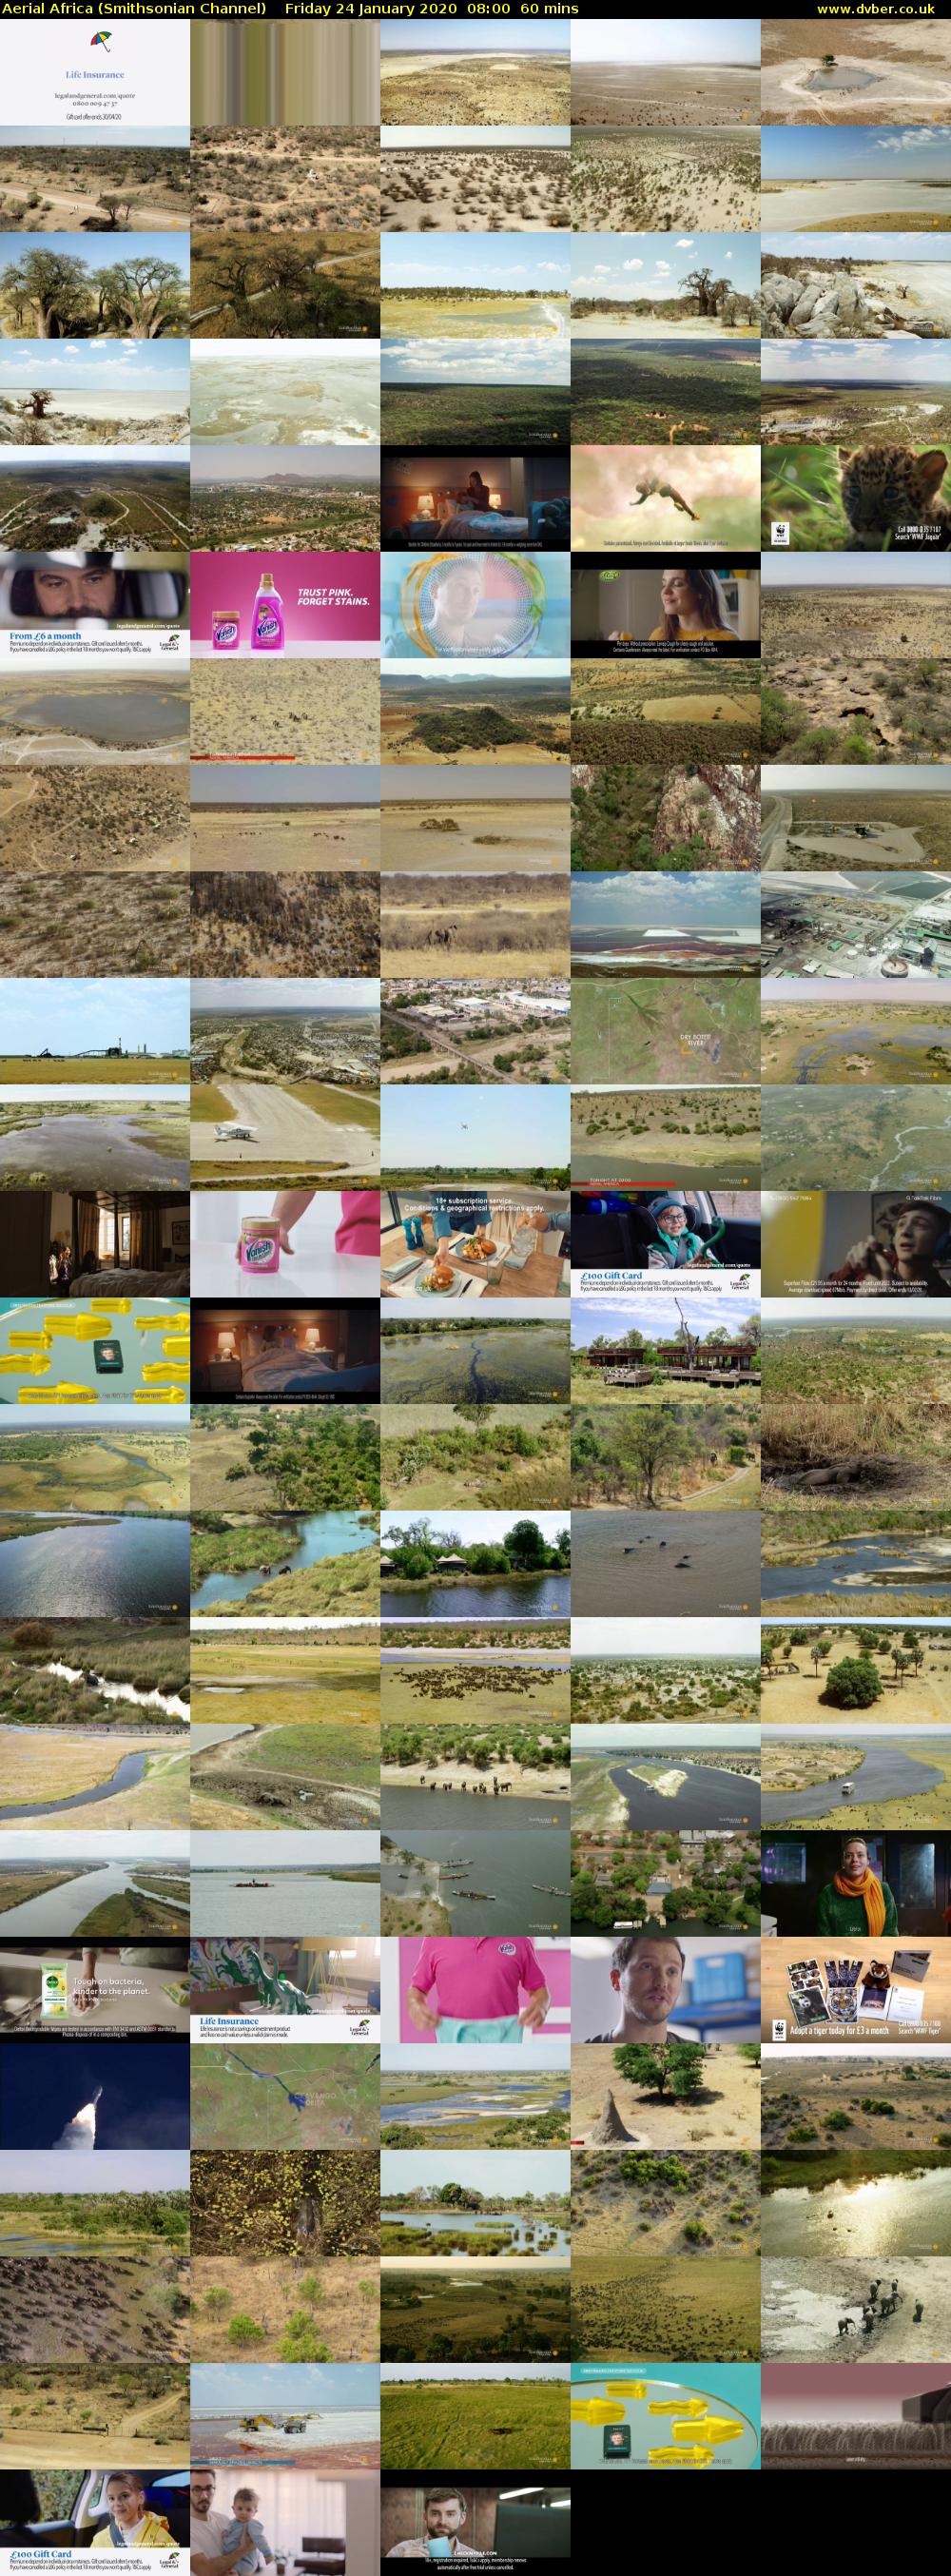 Aerial Africa (Smithsonian Channel) Friday 24 January 2020 08:00 - 09:00